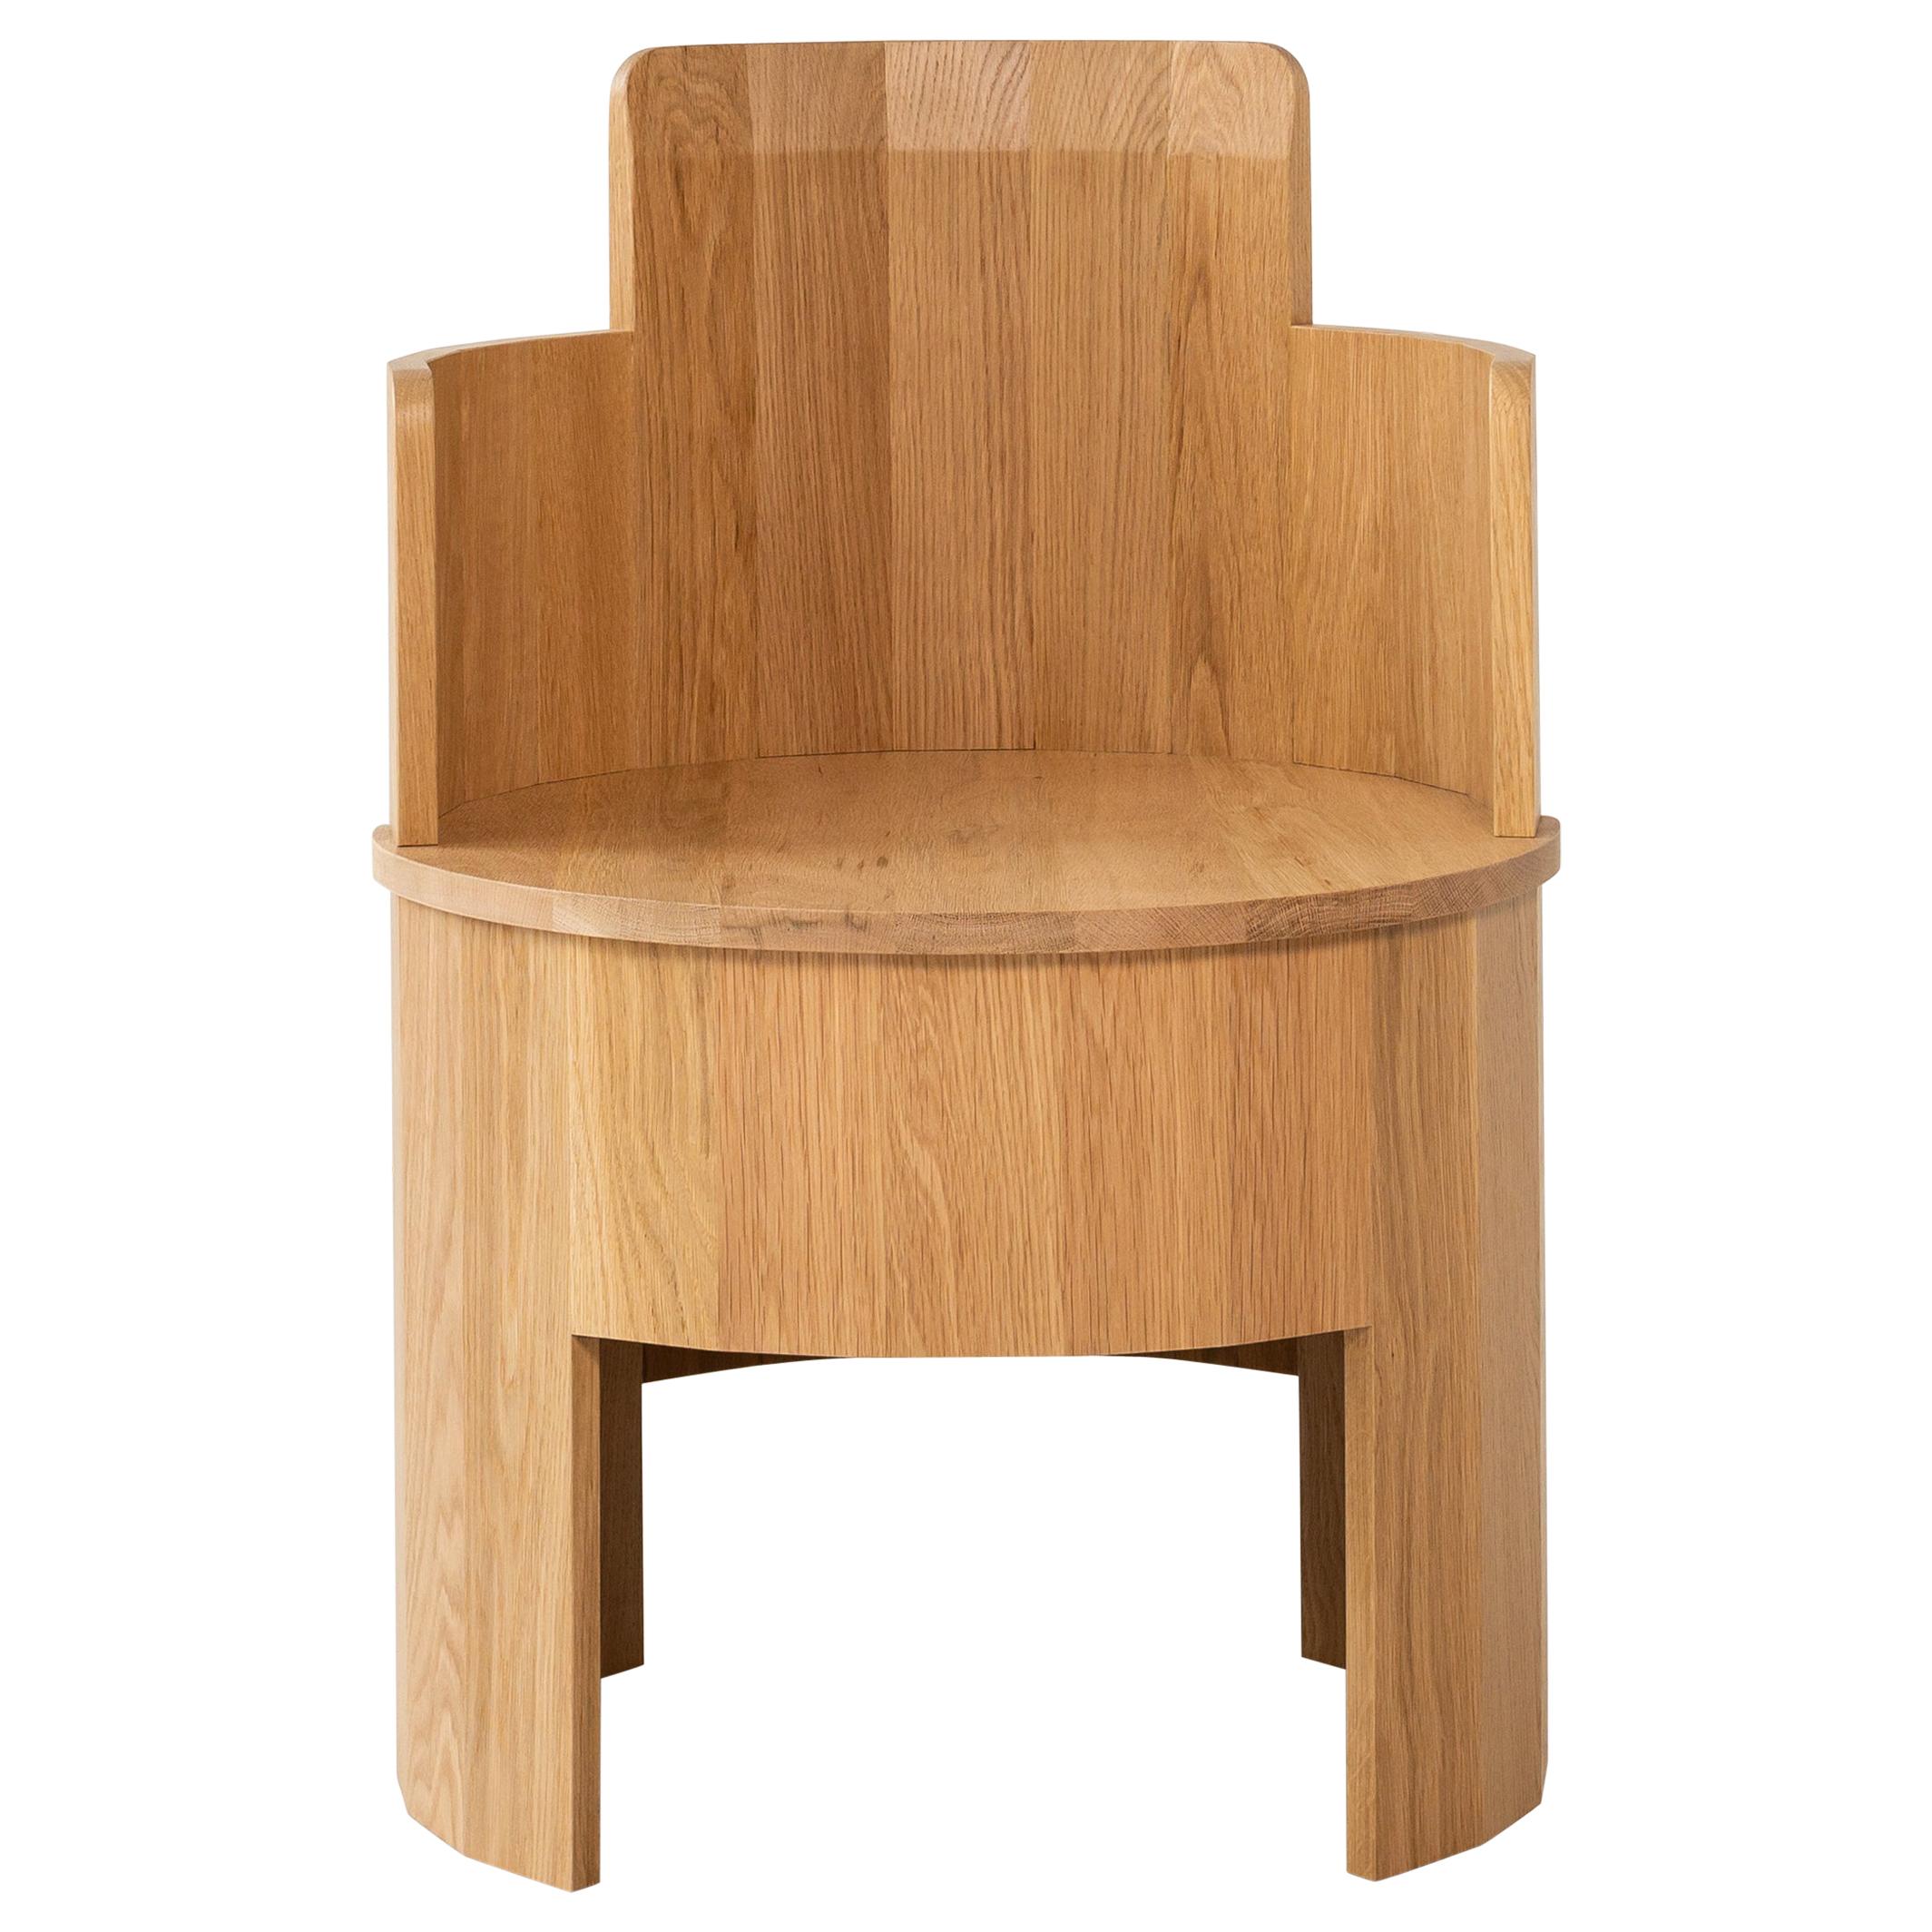 Contemporary White Oak Wood Cooperage Chair by Fort Standard, En Stock